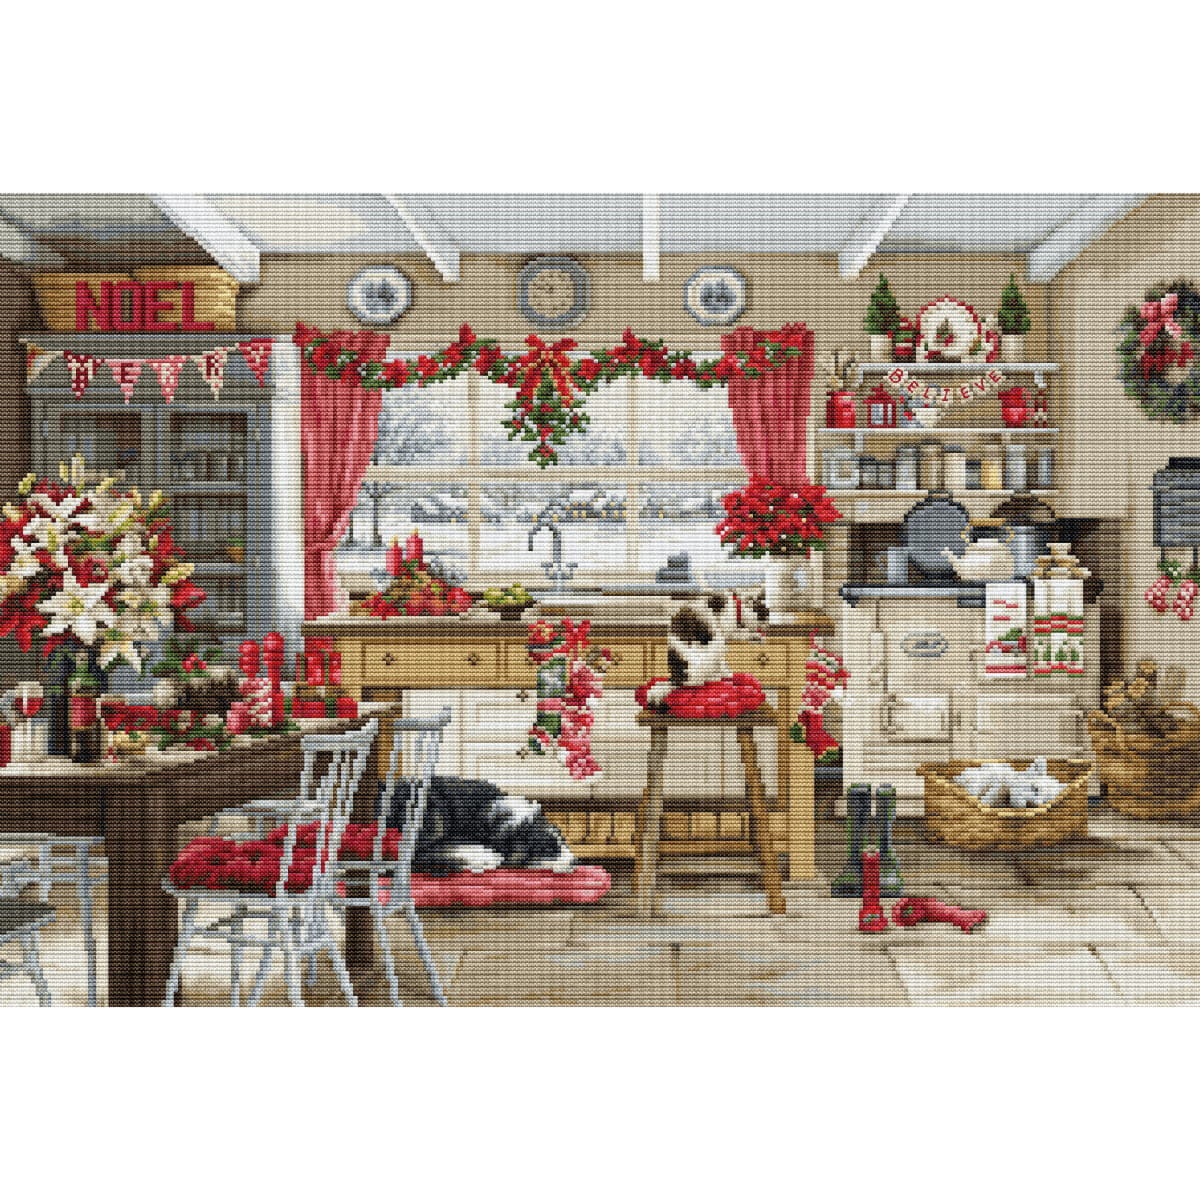 Luca-S counted cross stitch kit "Christmas Farmhouse...